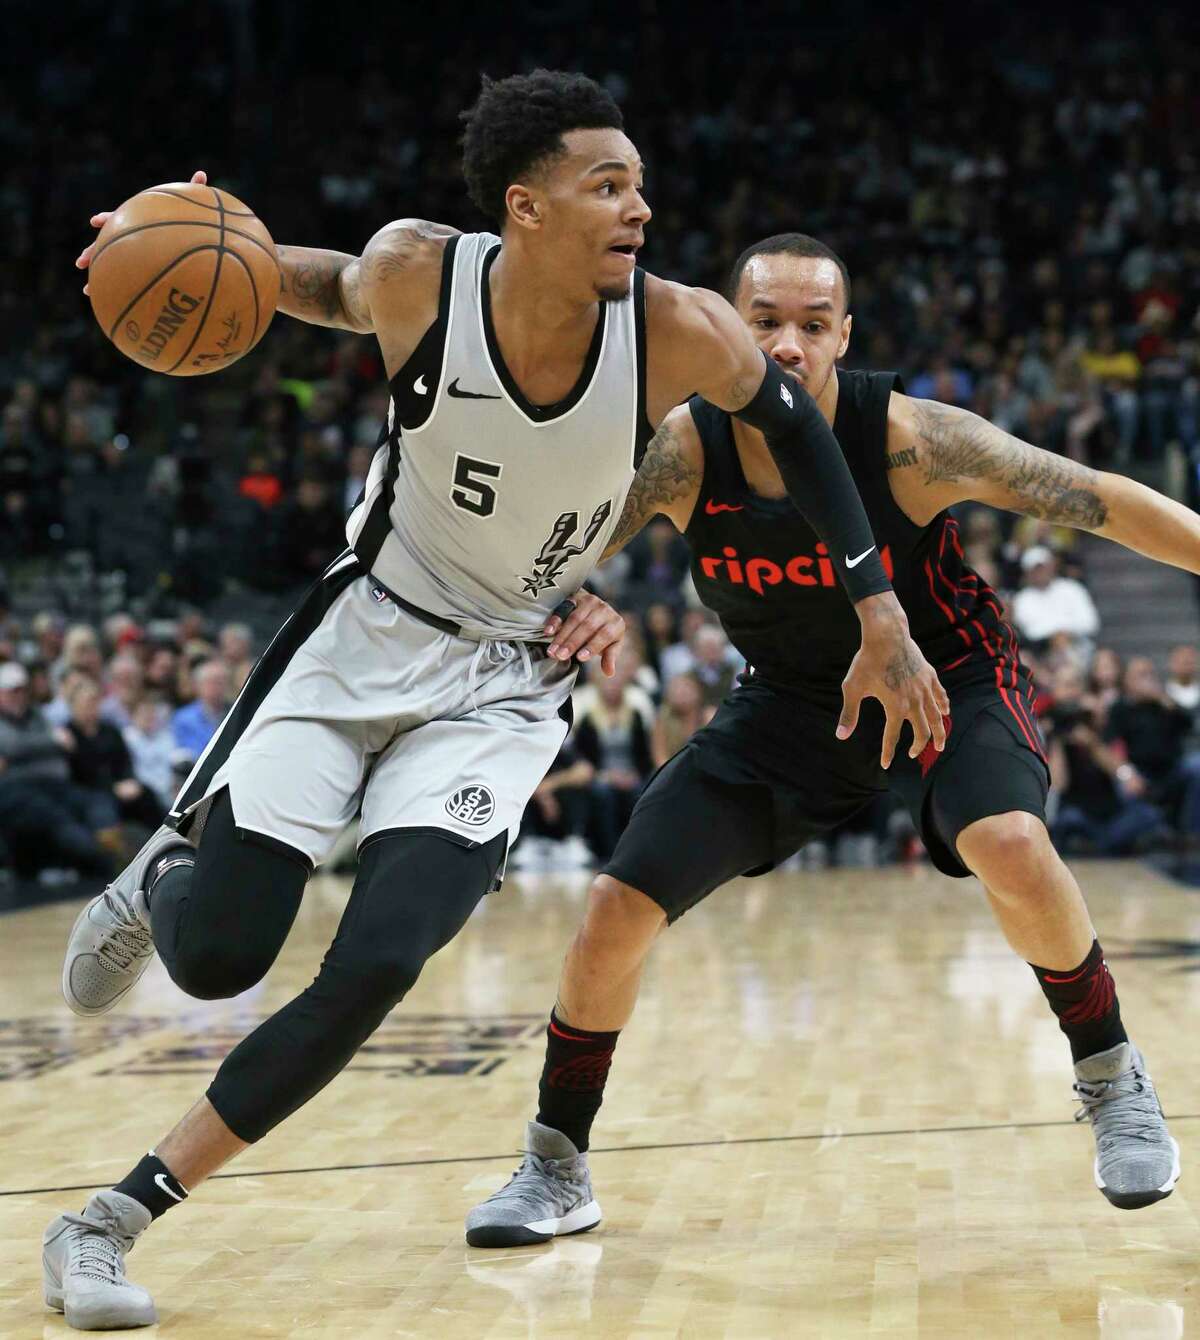 Dejounte Murray turns the corner into the lane as the Spurs play the Portland Trailblazers at the AT&T Center on April 7, 2018.